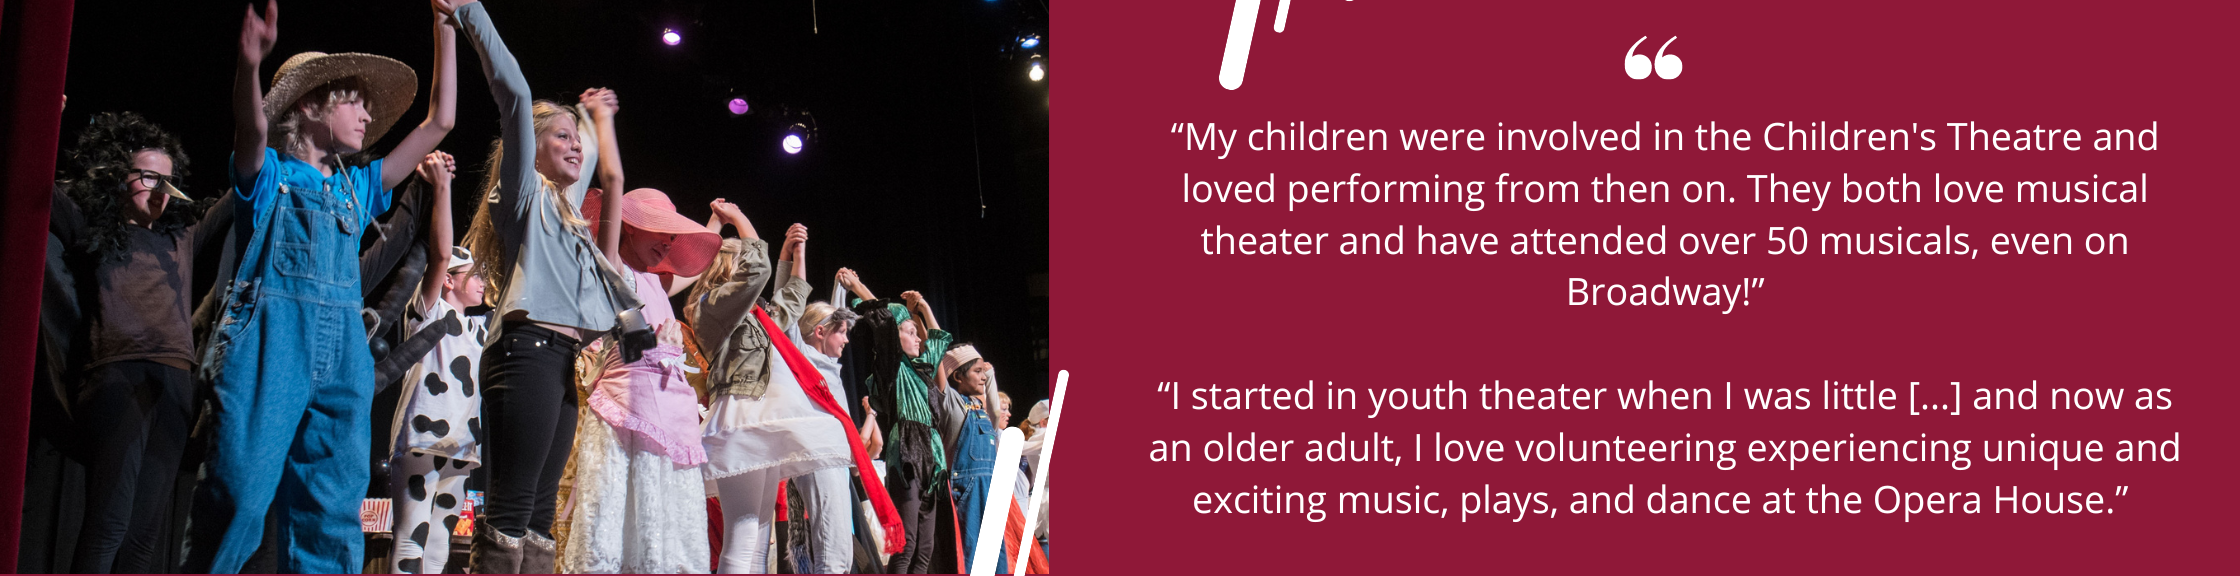 “My children were involved in the Children's Theatre and loved performing from then on. They both love musical theater and have attended over 50 musicals, even on Broadway!”</p>
<p>“I started in youth theater when I was little [...] and now as an older adult, I love volunteering experiencing unique and exciting music, plays, and dance at the Opera House.”<br />
